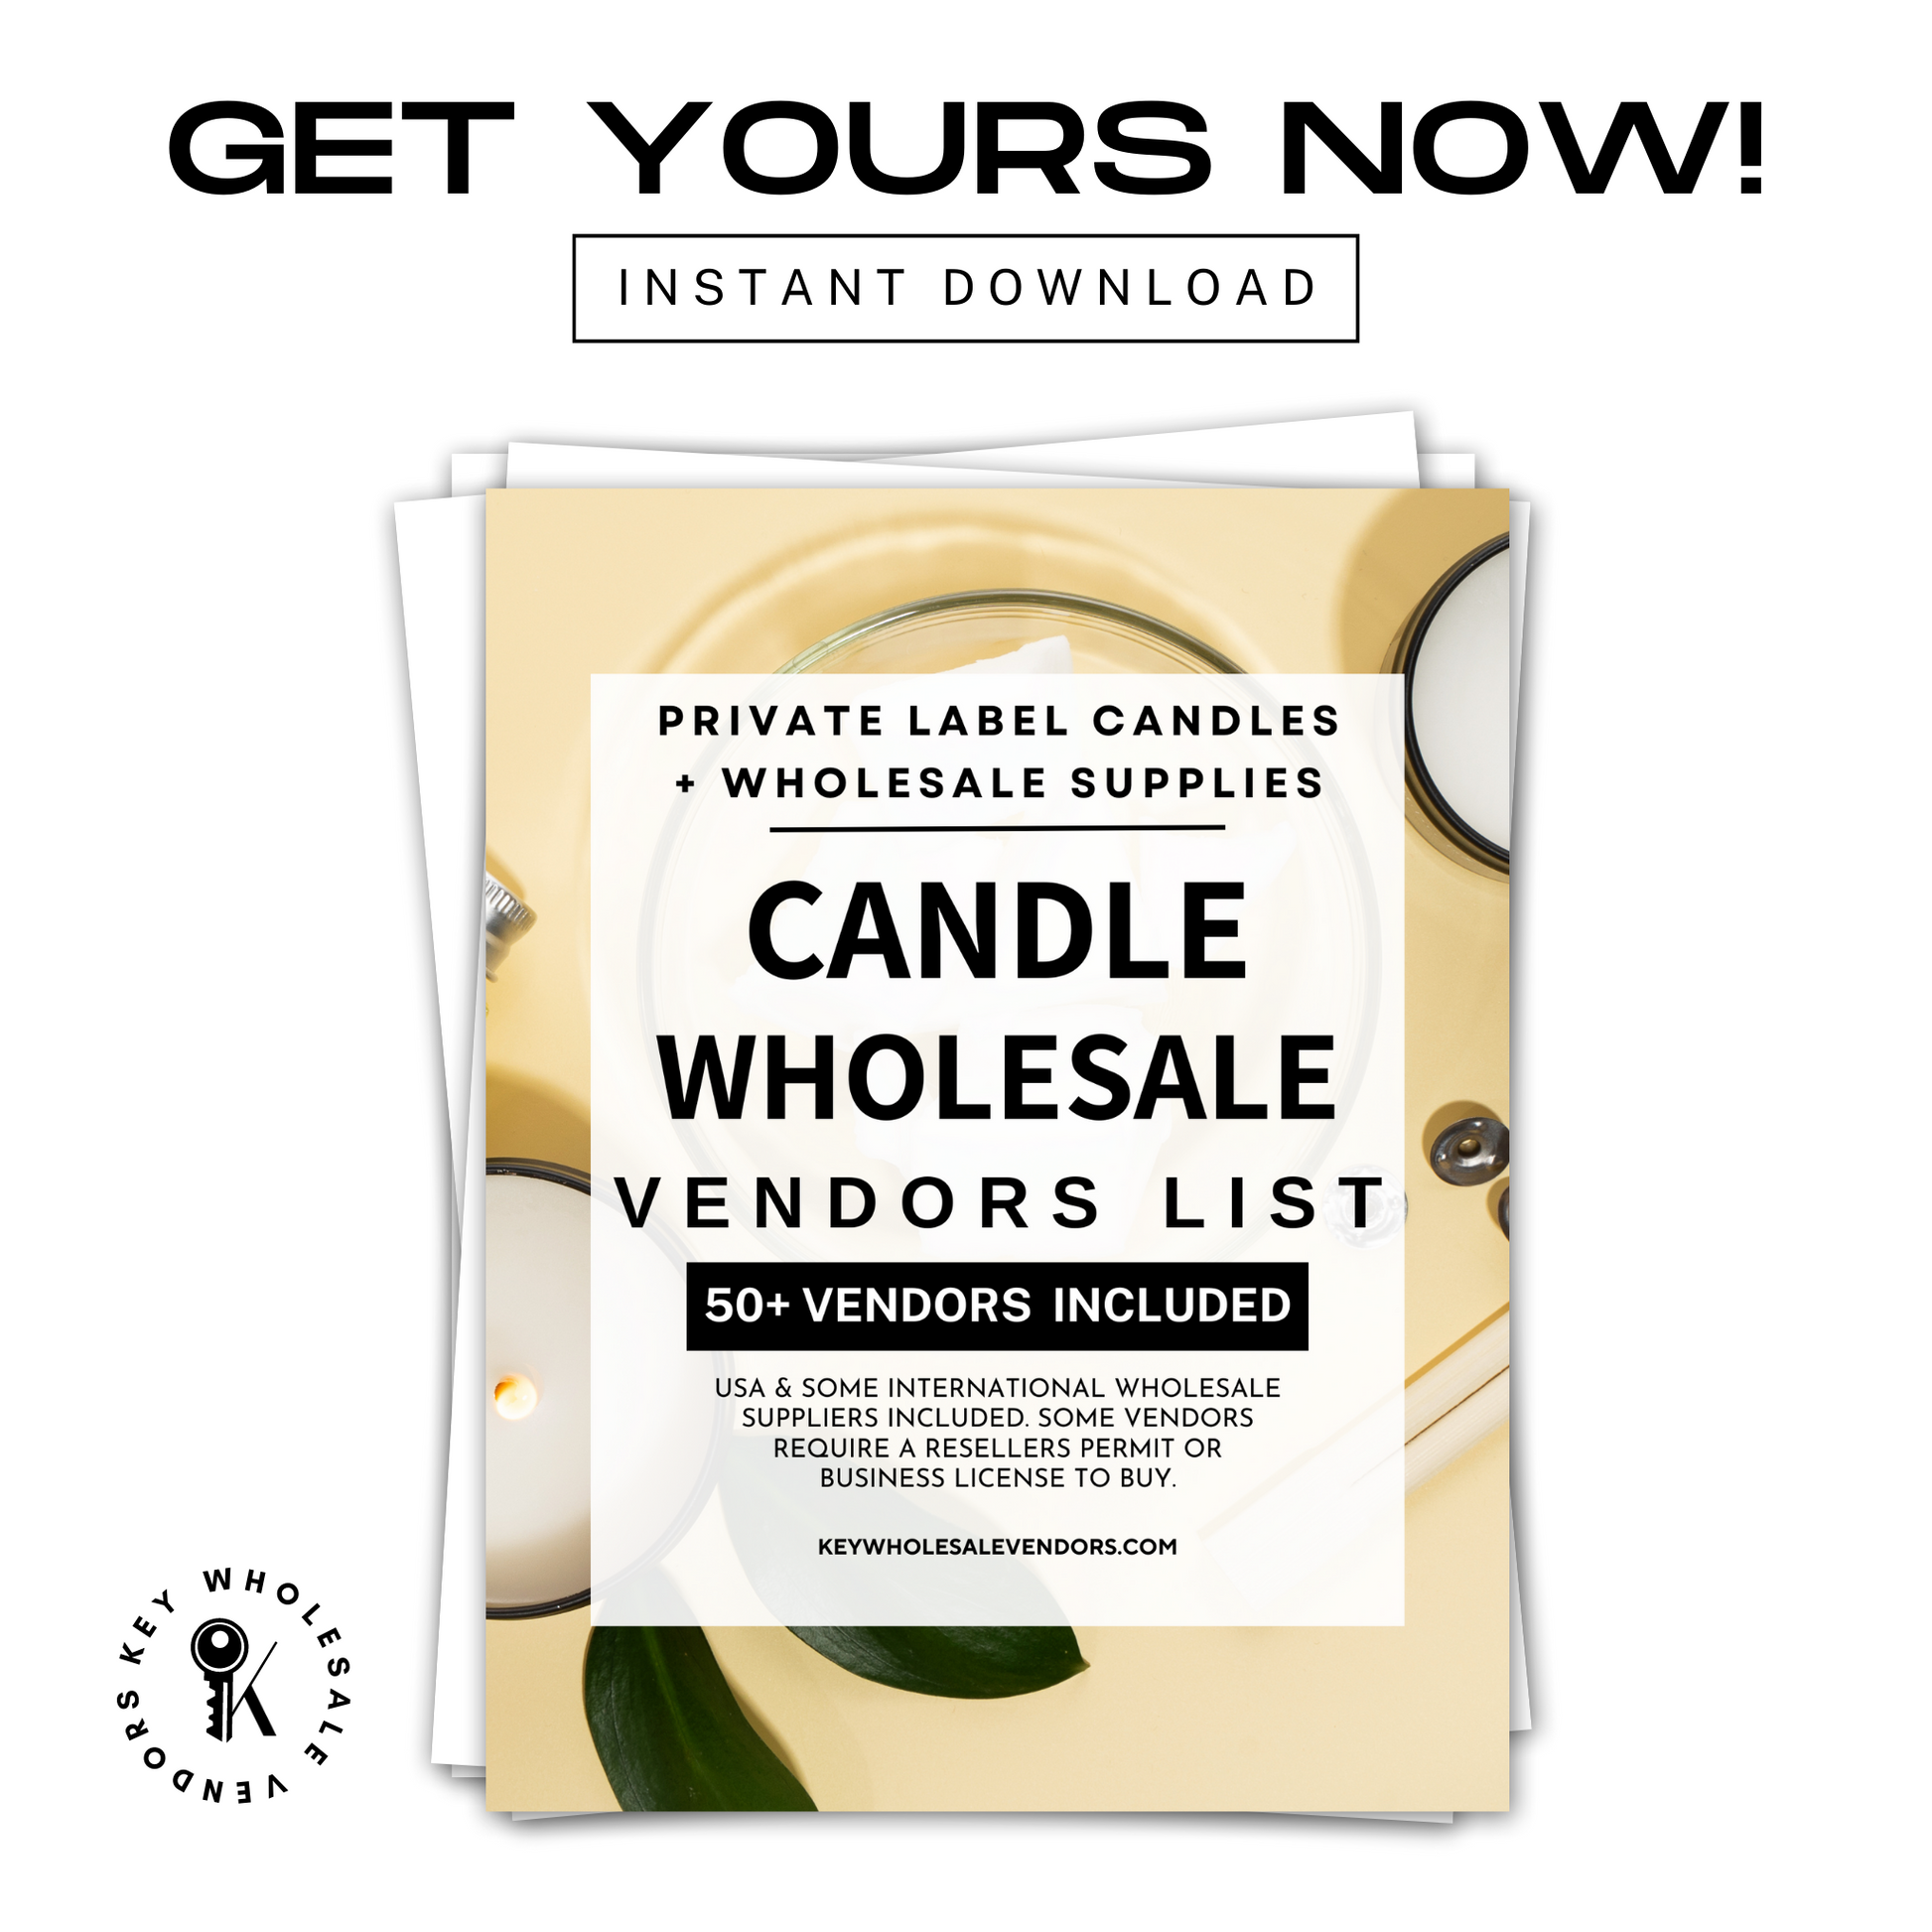 A Complete Candle Making Supplies Guide